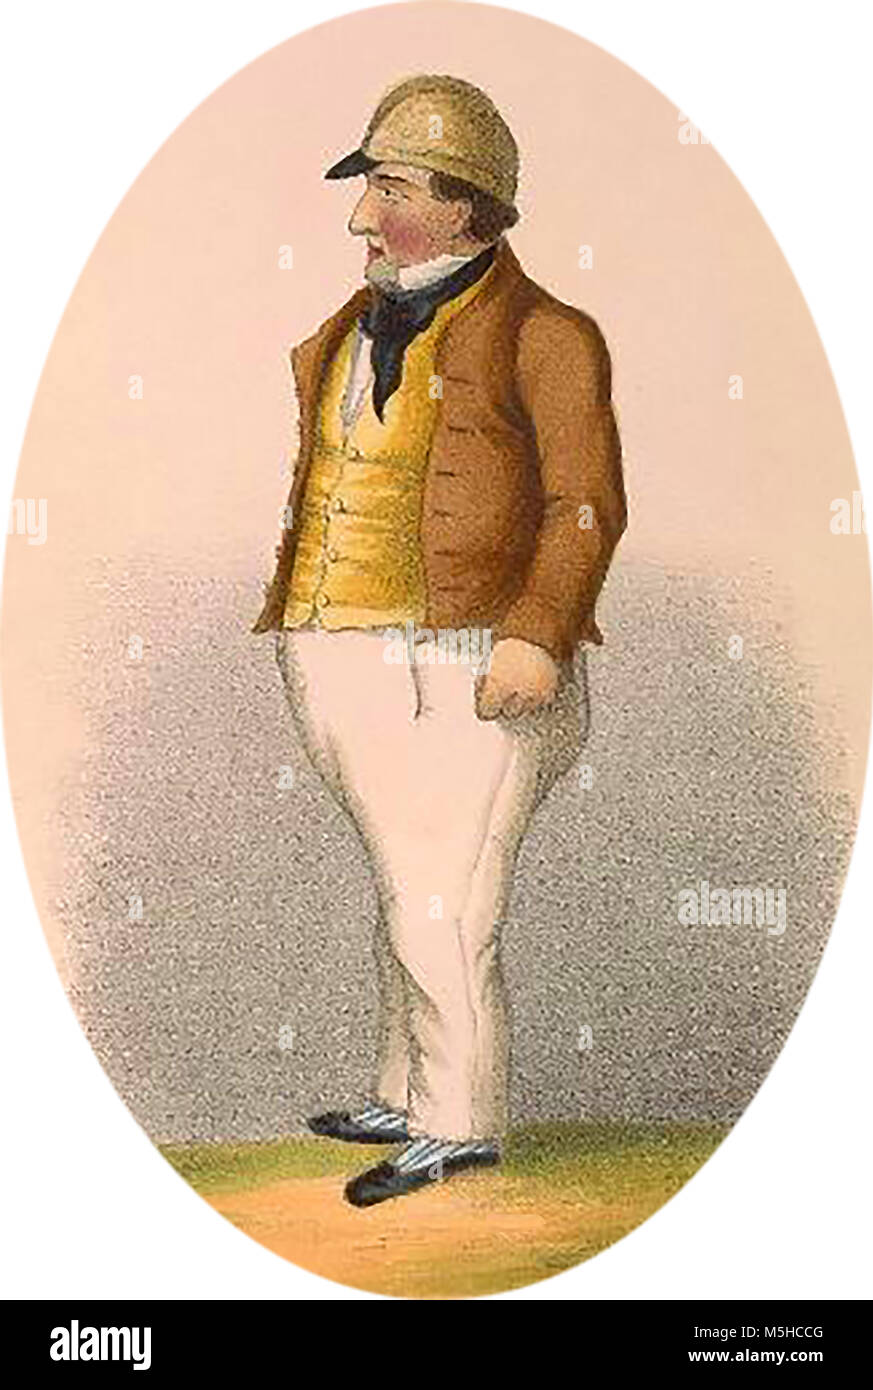 Possible self-portrait of balloonist Robert Cocking first man to die in a parachute accident.(1776 –  1837) the a British watercolour artist who died in the first parachute accident. Stock Photo